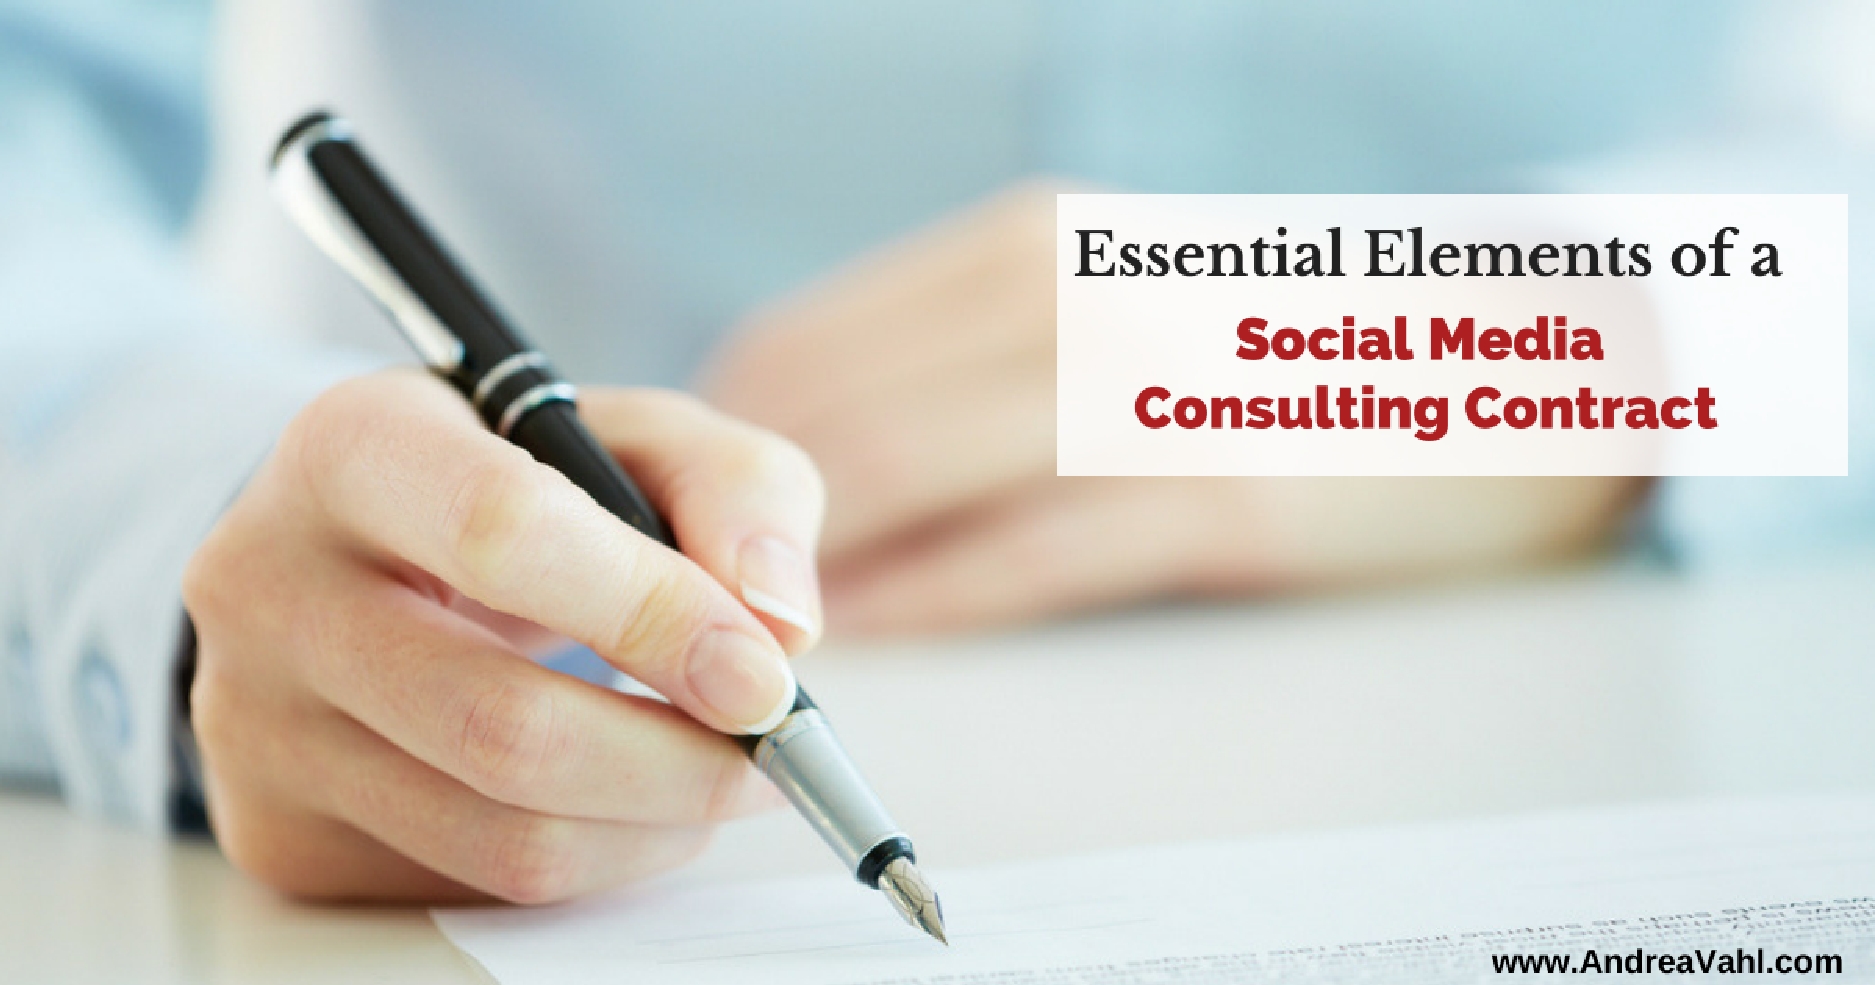 Essential Elements of a Social Media Consultant Contract